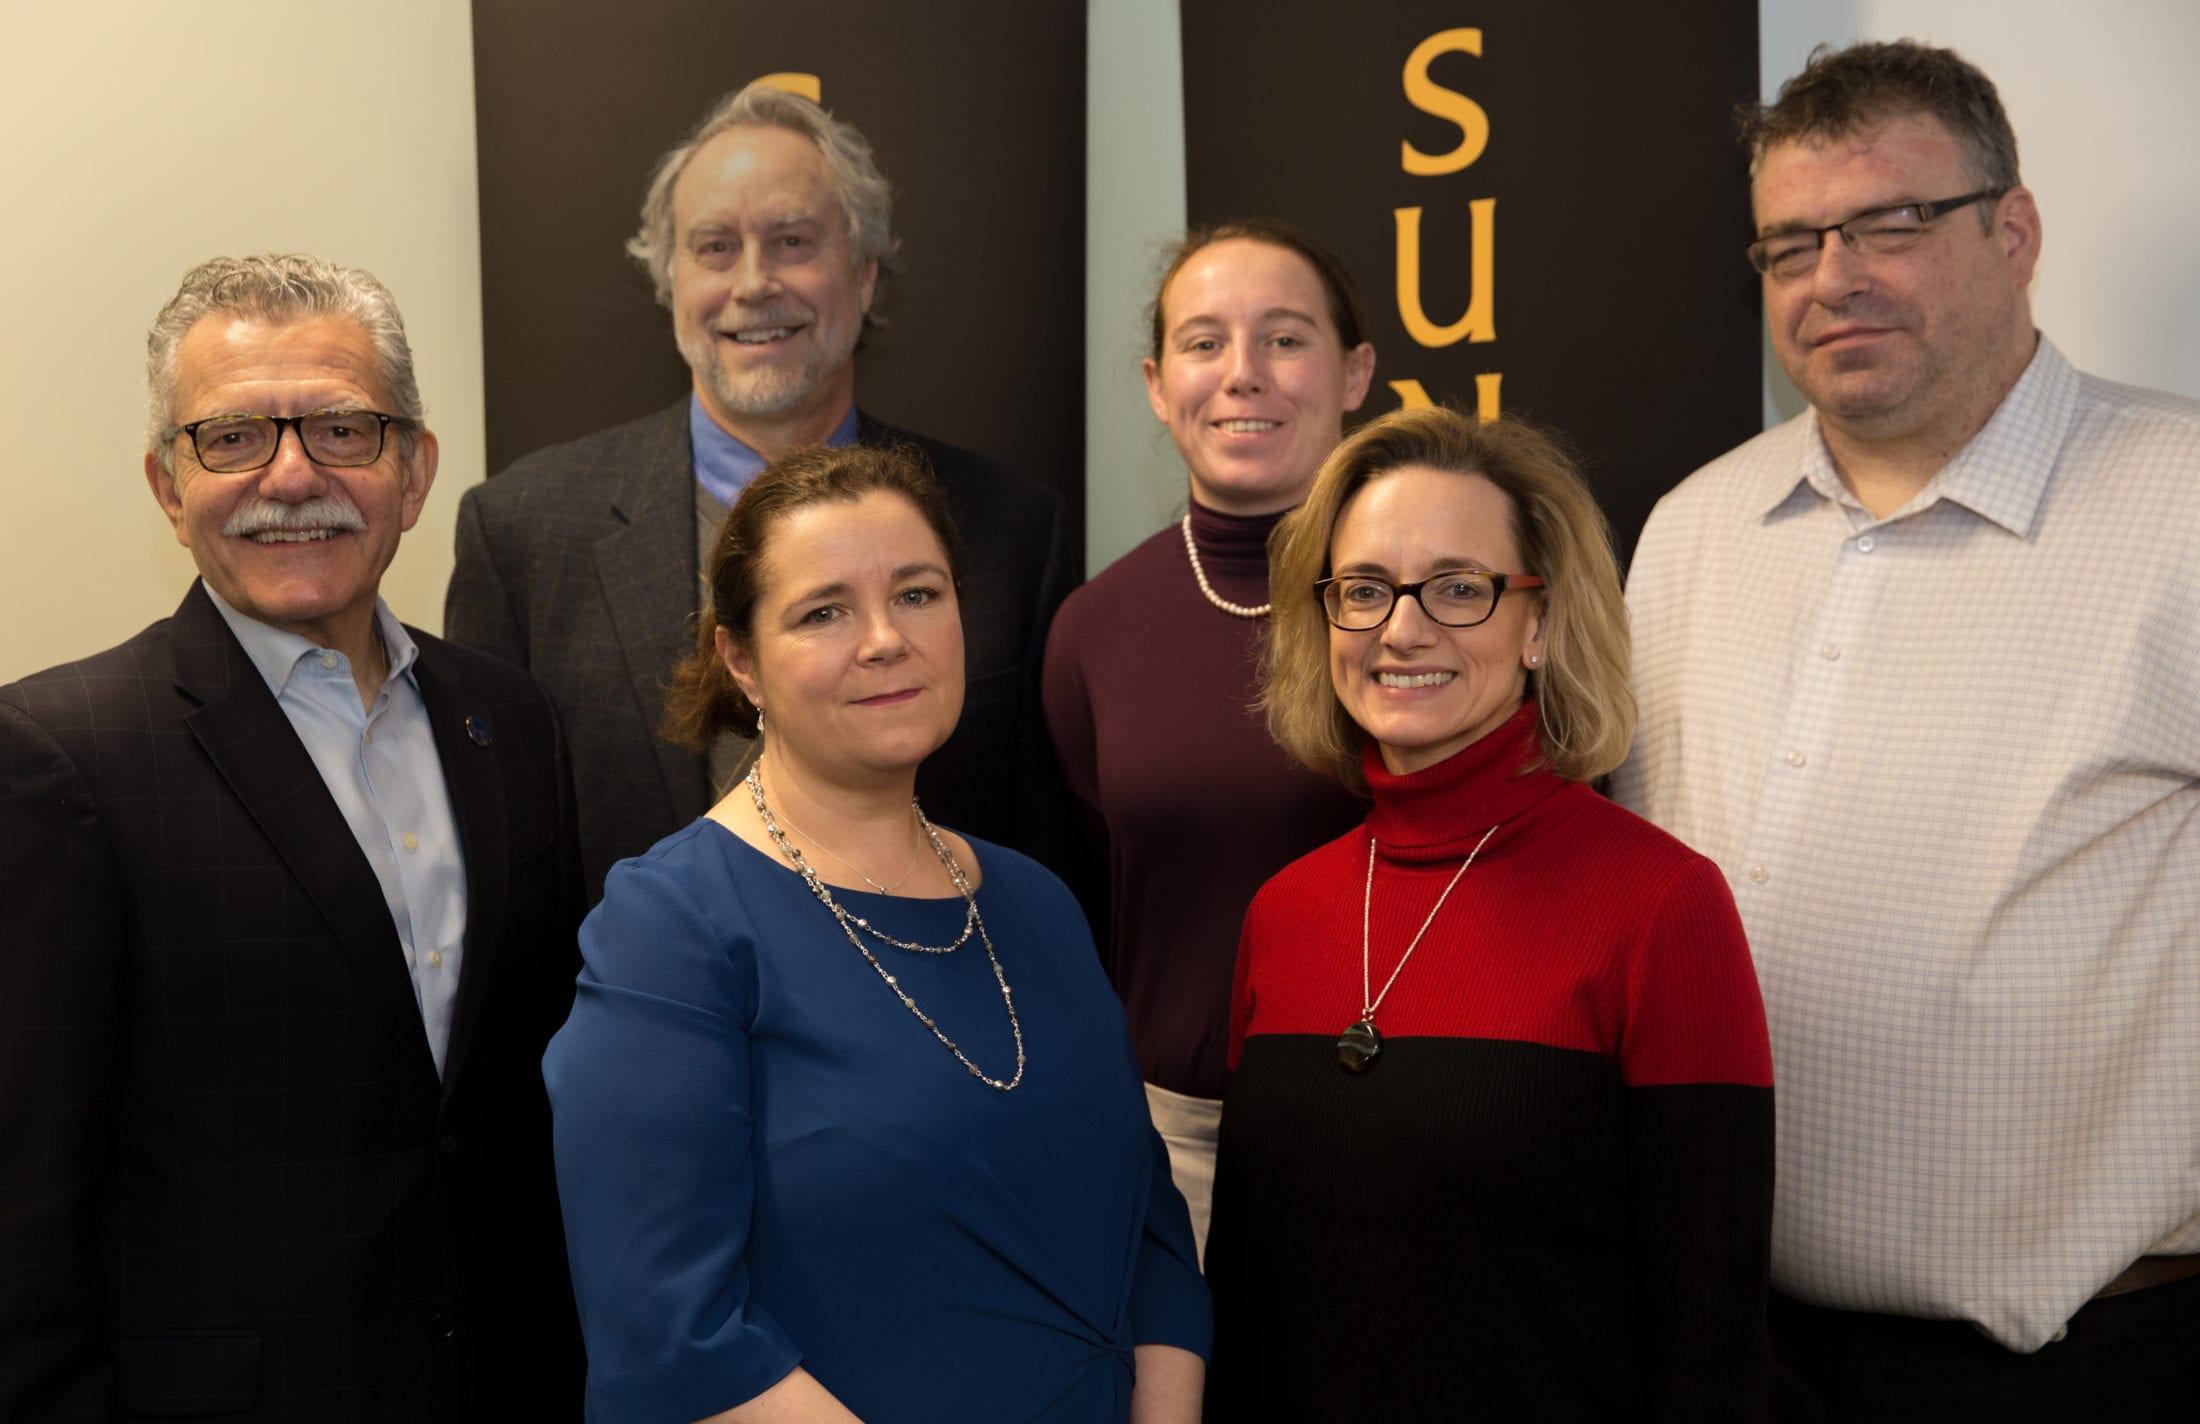 Transfer to Ireland: SUNY Broome forms its first international partnership with the University of Limerick